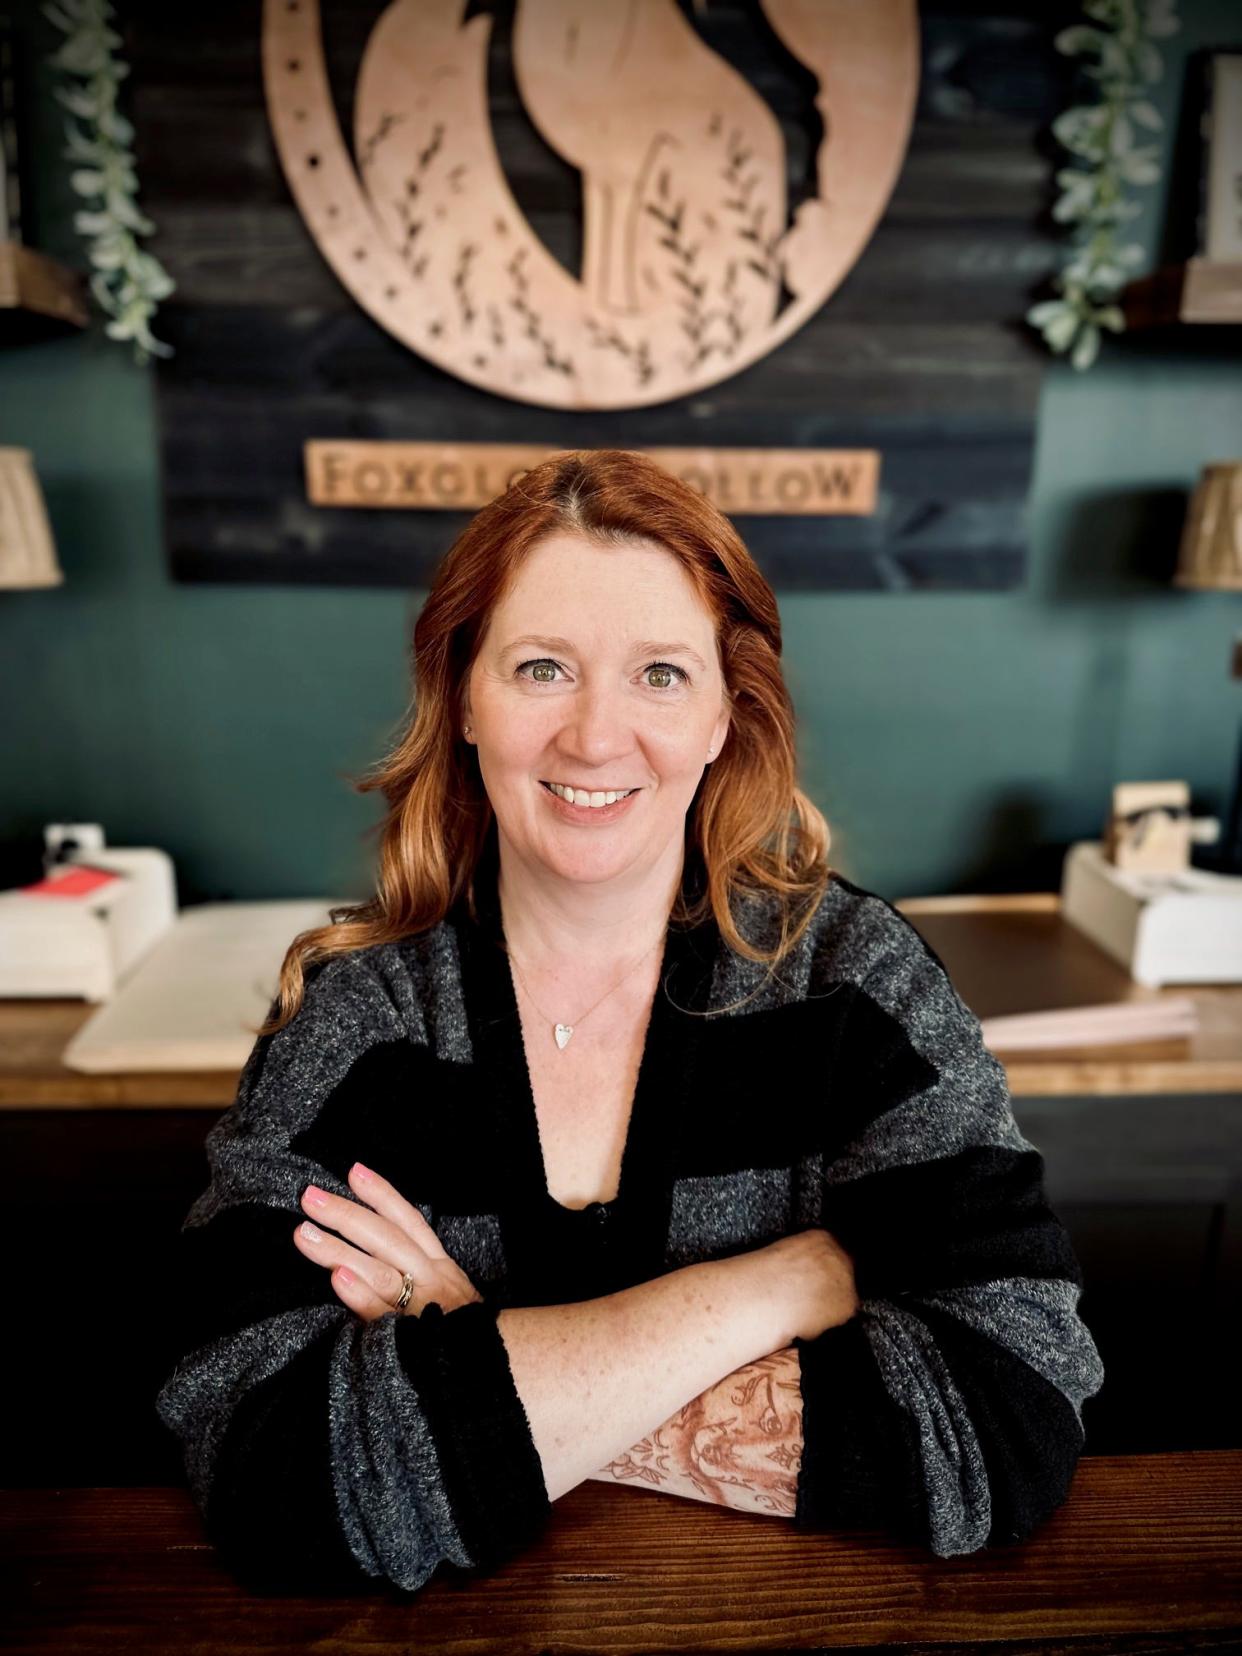 After helping others start a business, Marion native Beth Fox decided to start her own, and recently opened Foxglove Hollow Home Décor at 285 W. Center St.